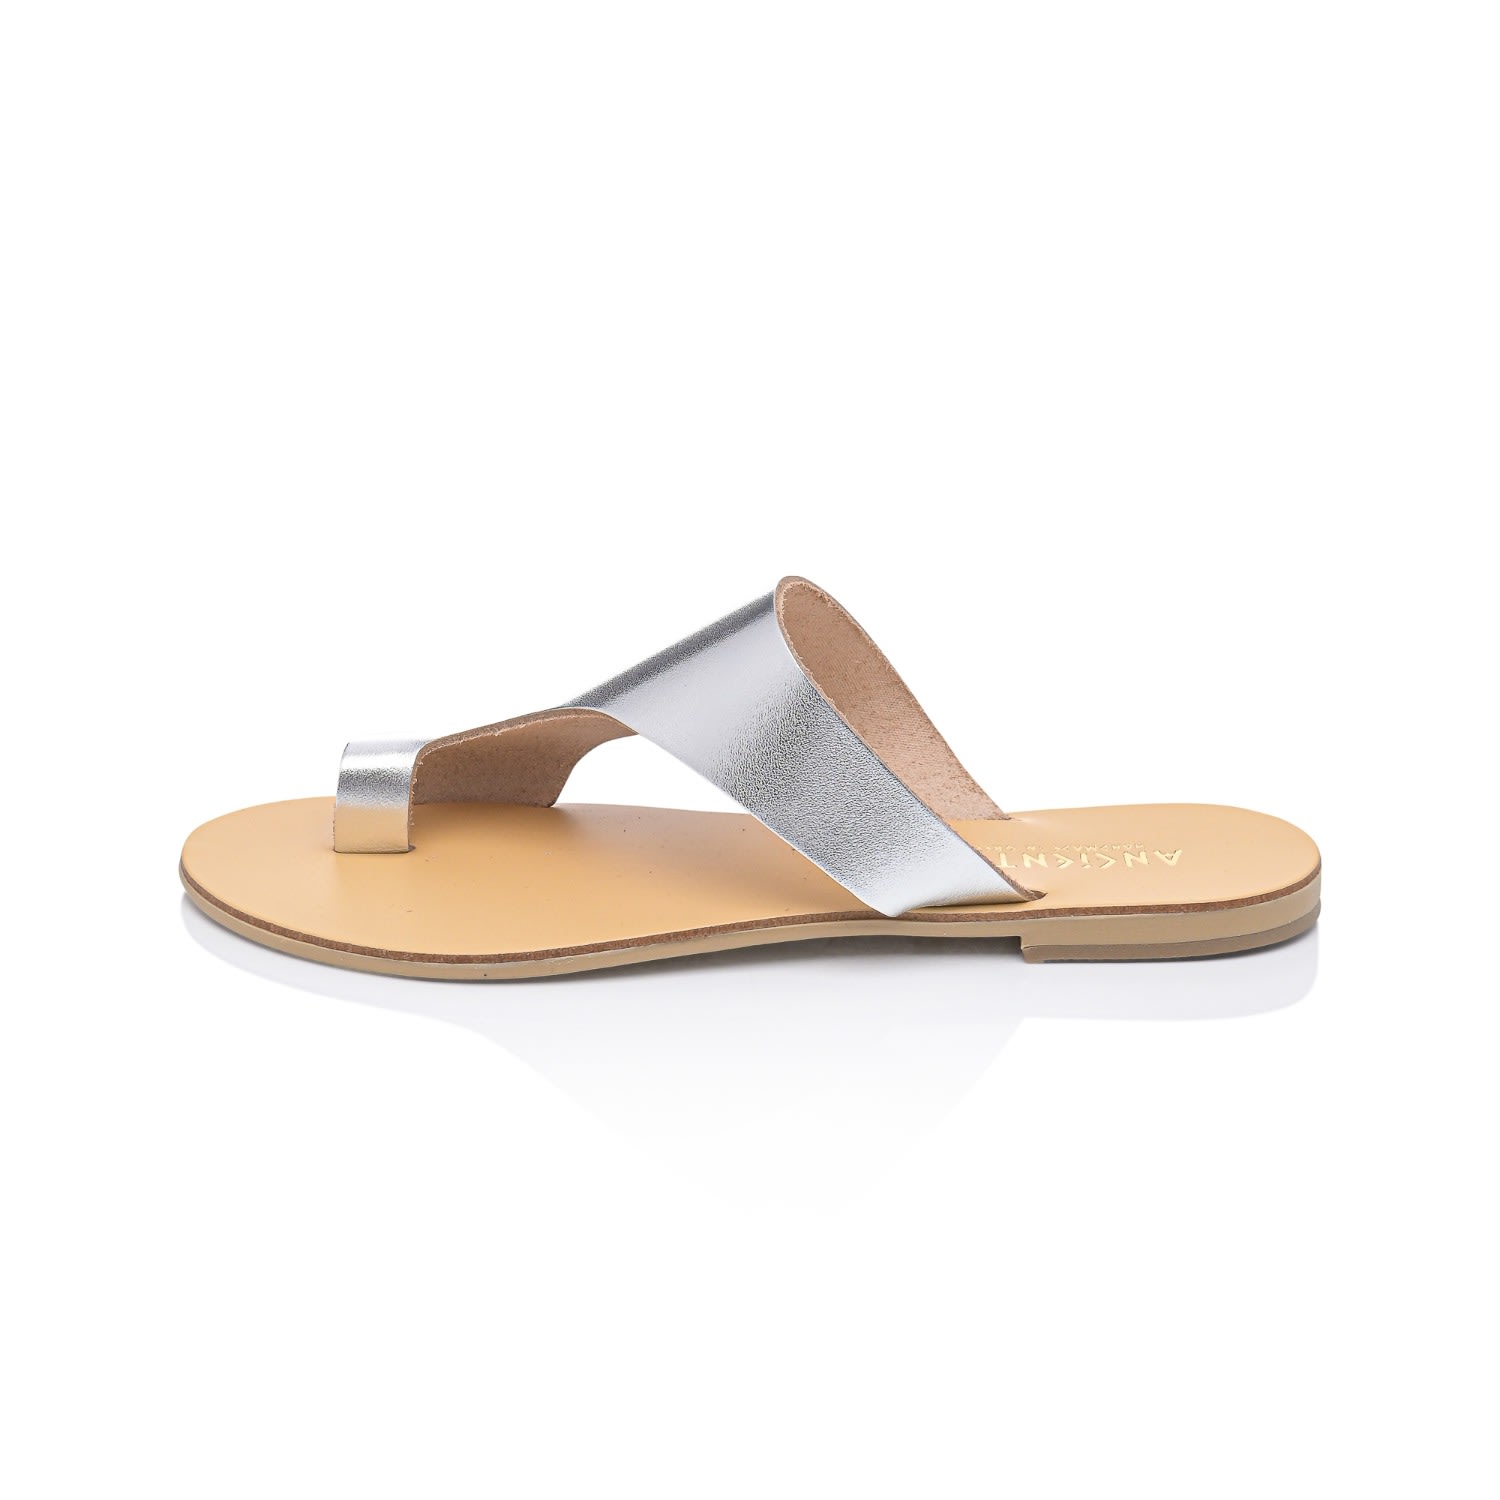 Ancientoo Celaeno Silver Leather Contemporary Fashion Flip Flops With Toe Ring – Women's Leather Slide Sandal In Metallic